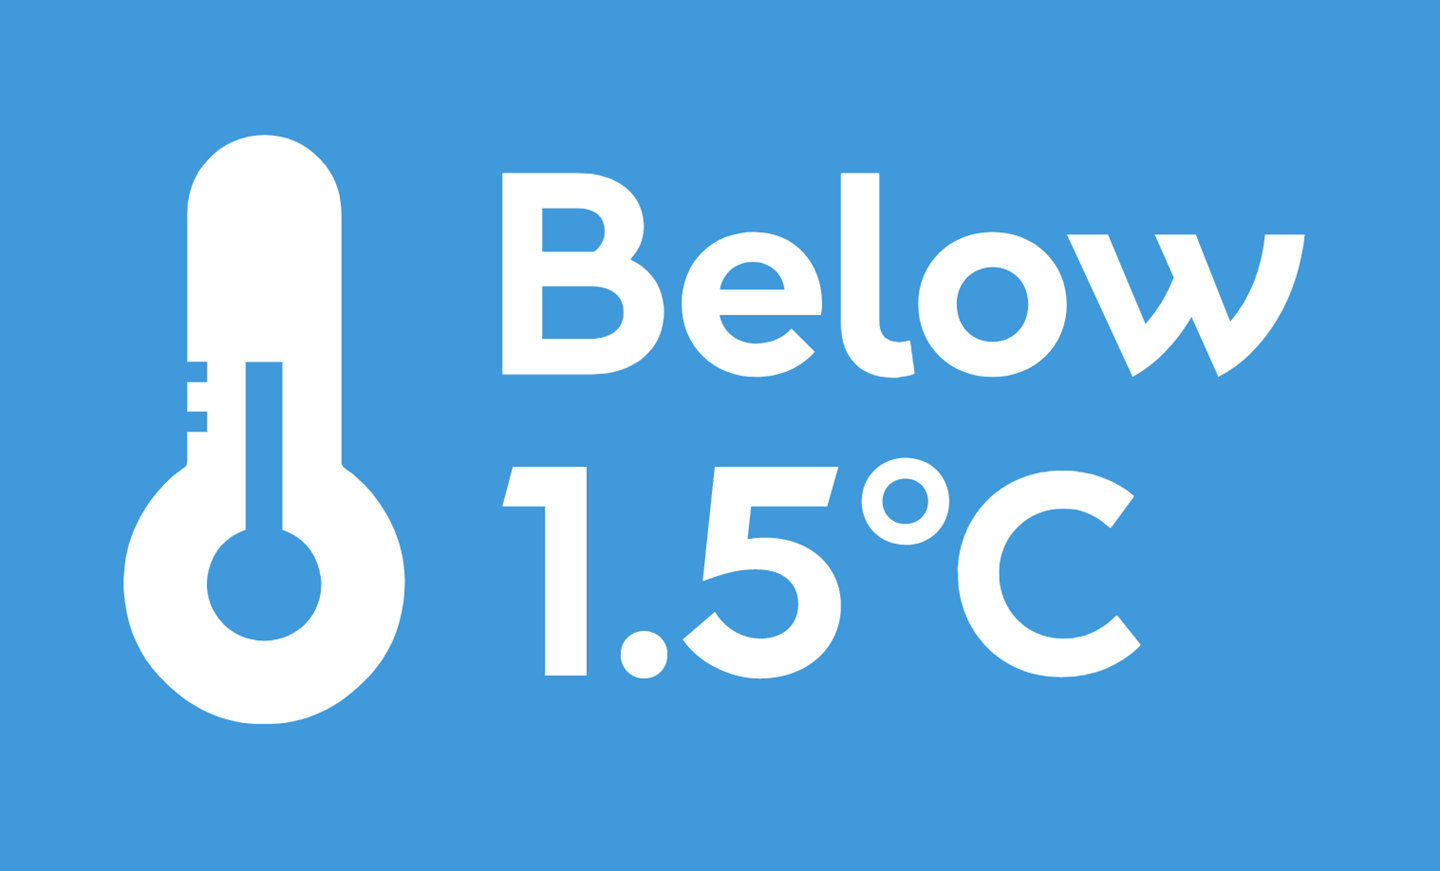 Staying below 1.5 °C to fight climate change.